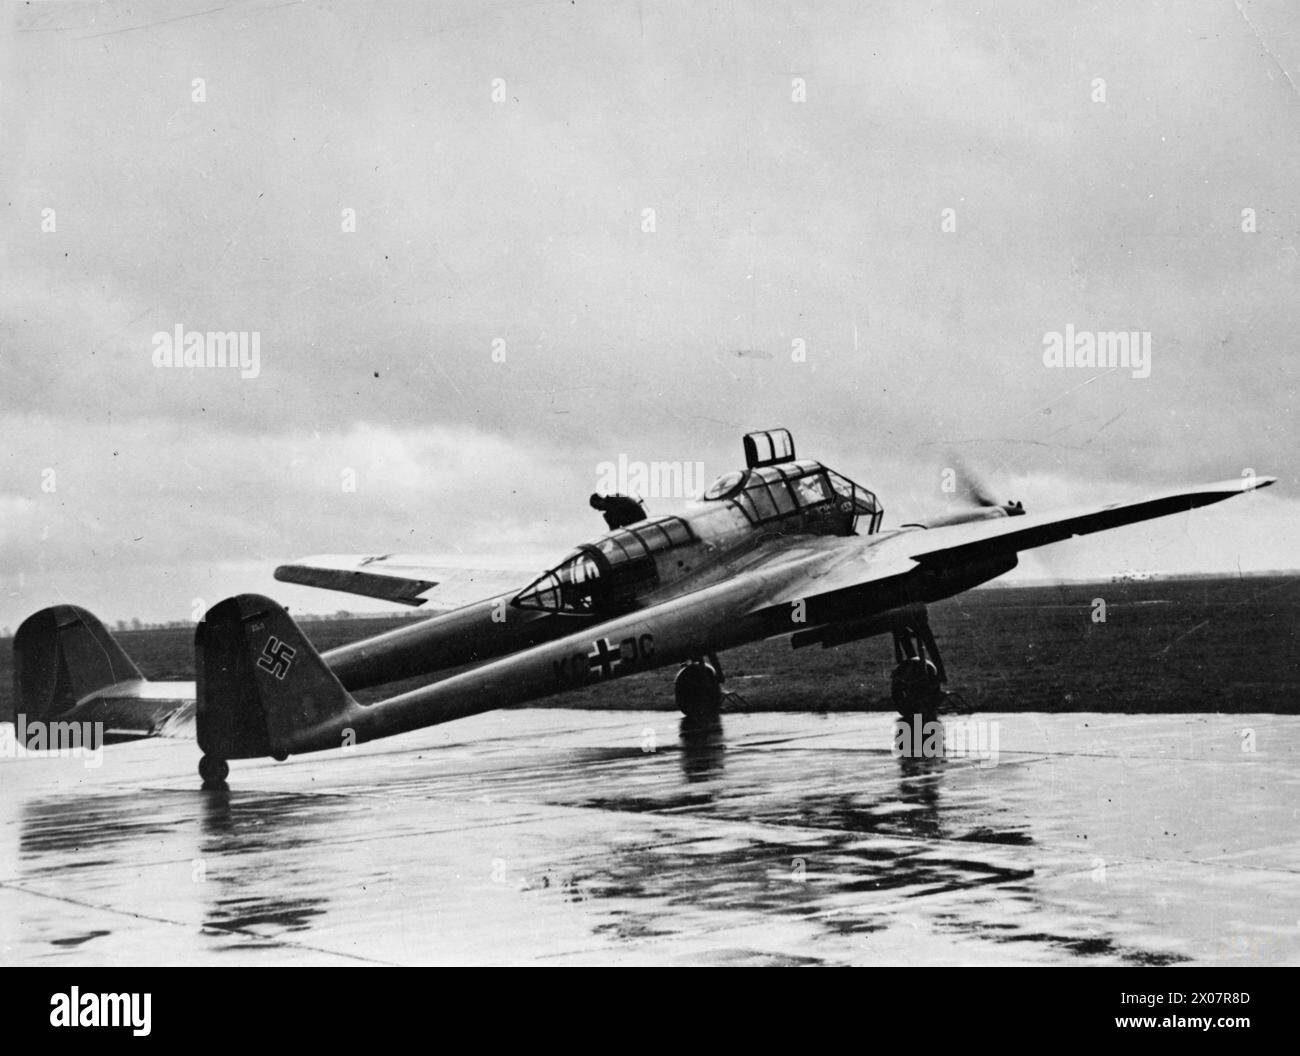 GERMAN MILITARY AIRCRAFT 1939-1945 - Focke-Wulf Fw 189A. The twin-fuselage Fw 189 was designed as a light-bomber but saw service mostly as a short-range reconnaissance and liaison aircraft on the Eastern Front Stock Photo